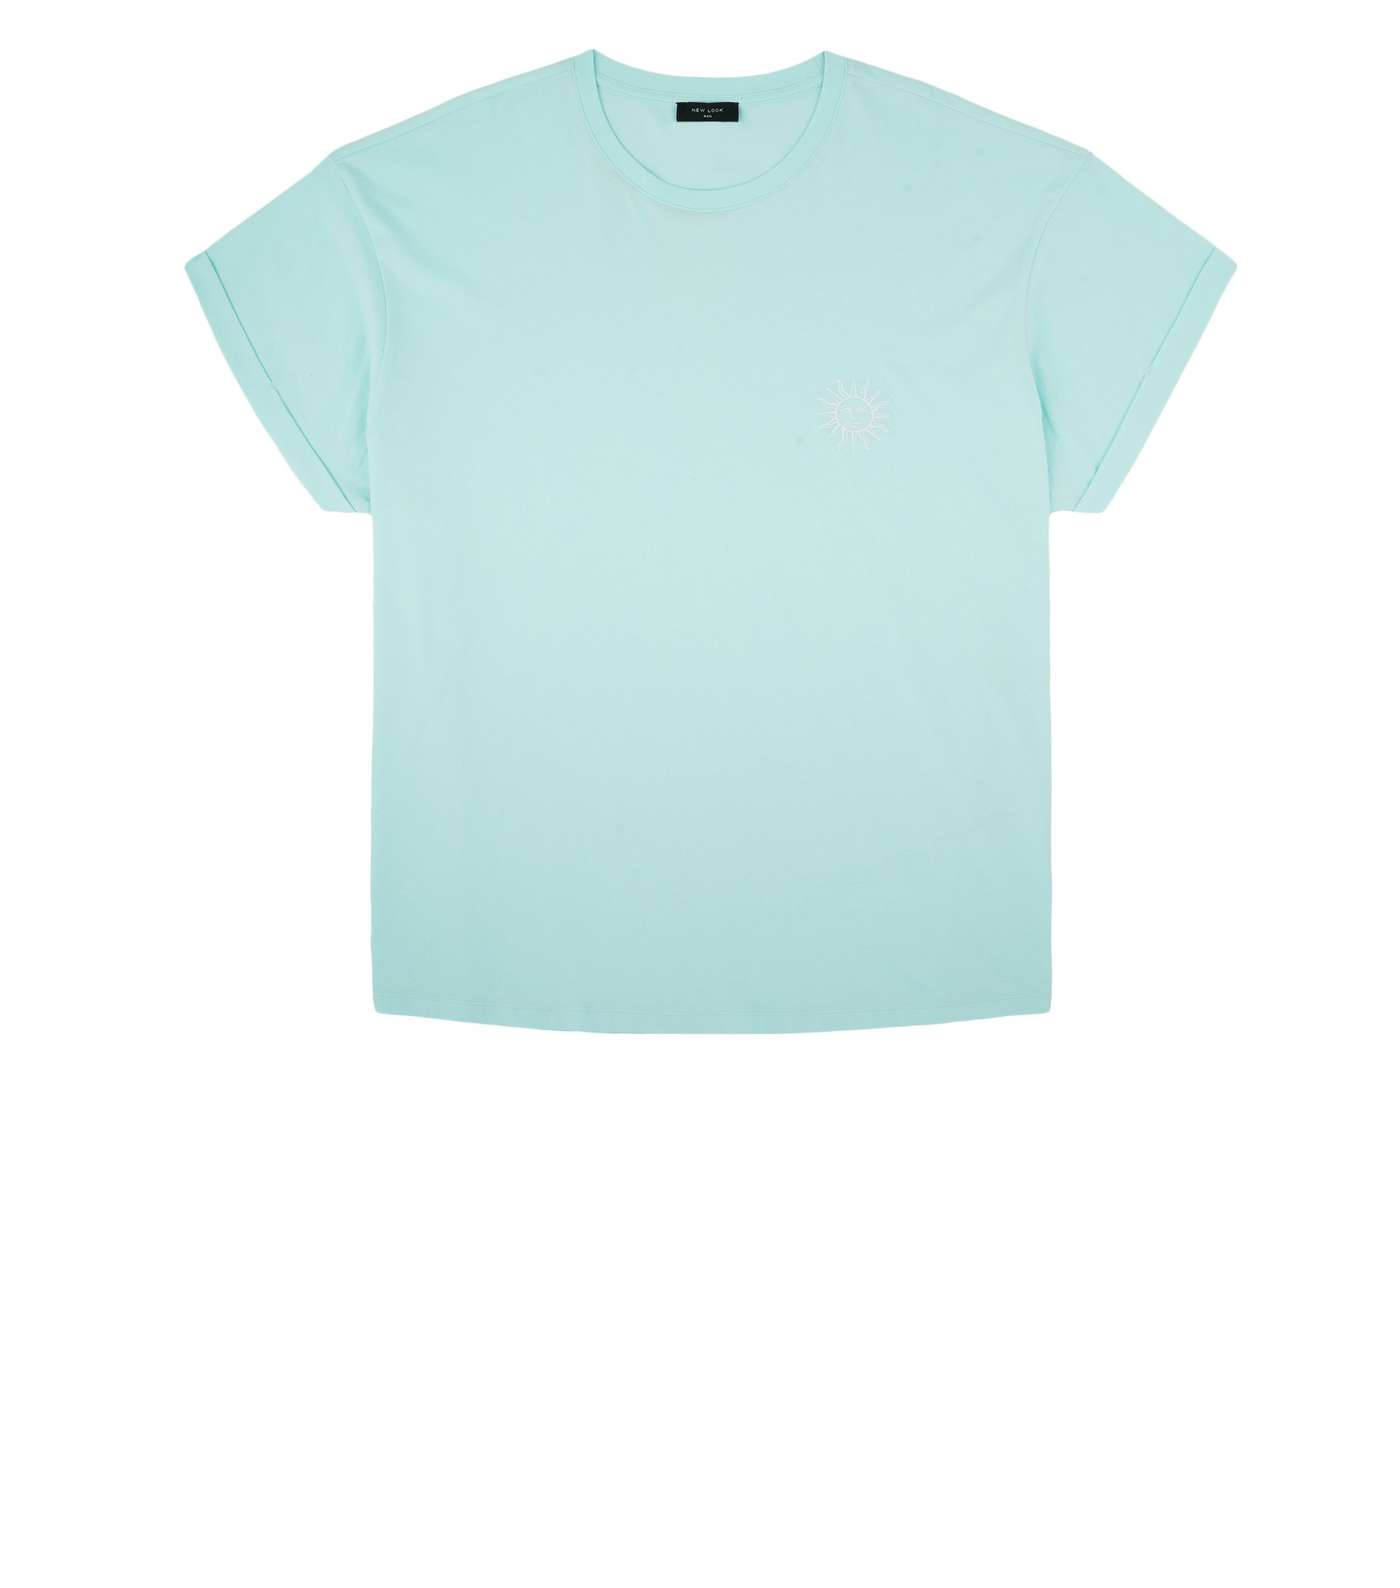 Plus Size Mint Green Sun Embroidered T-Shirt Image 4